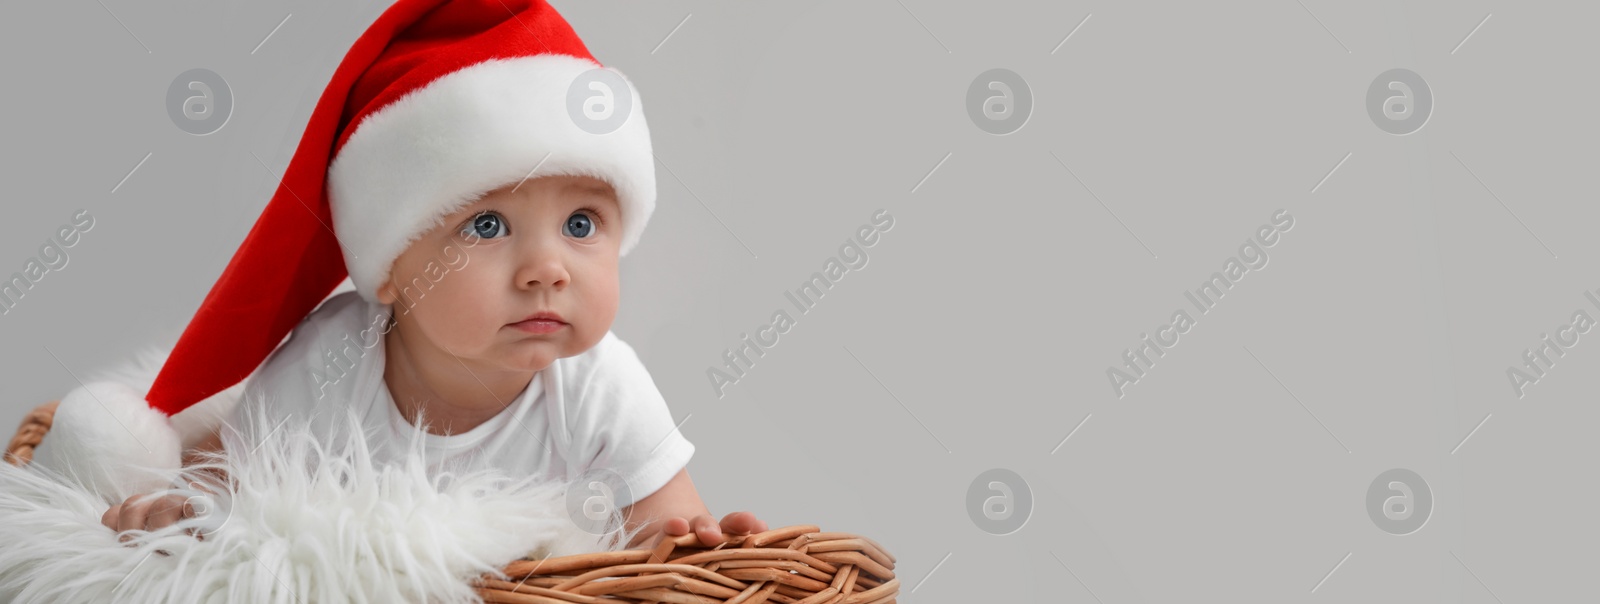 Image of Cute baby wearing Santa hat in wicker basket on light grey background, banner design with space for text. Christmas celebration